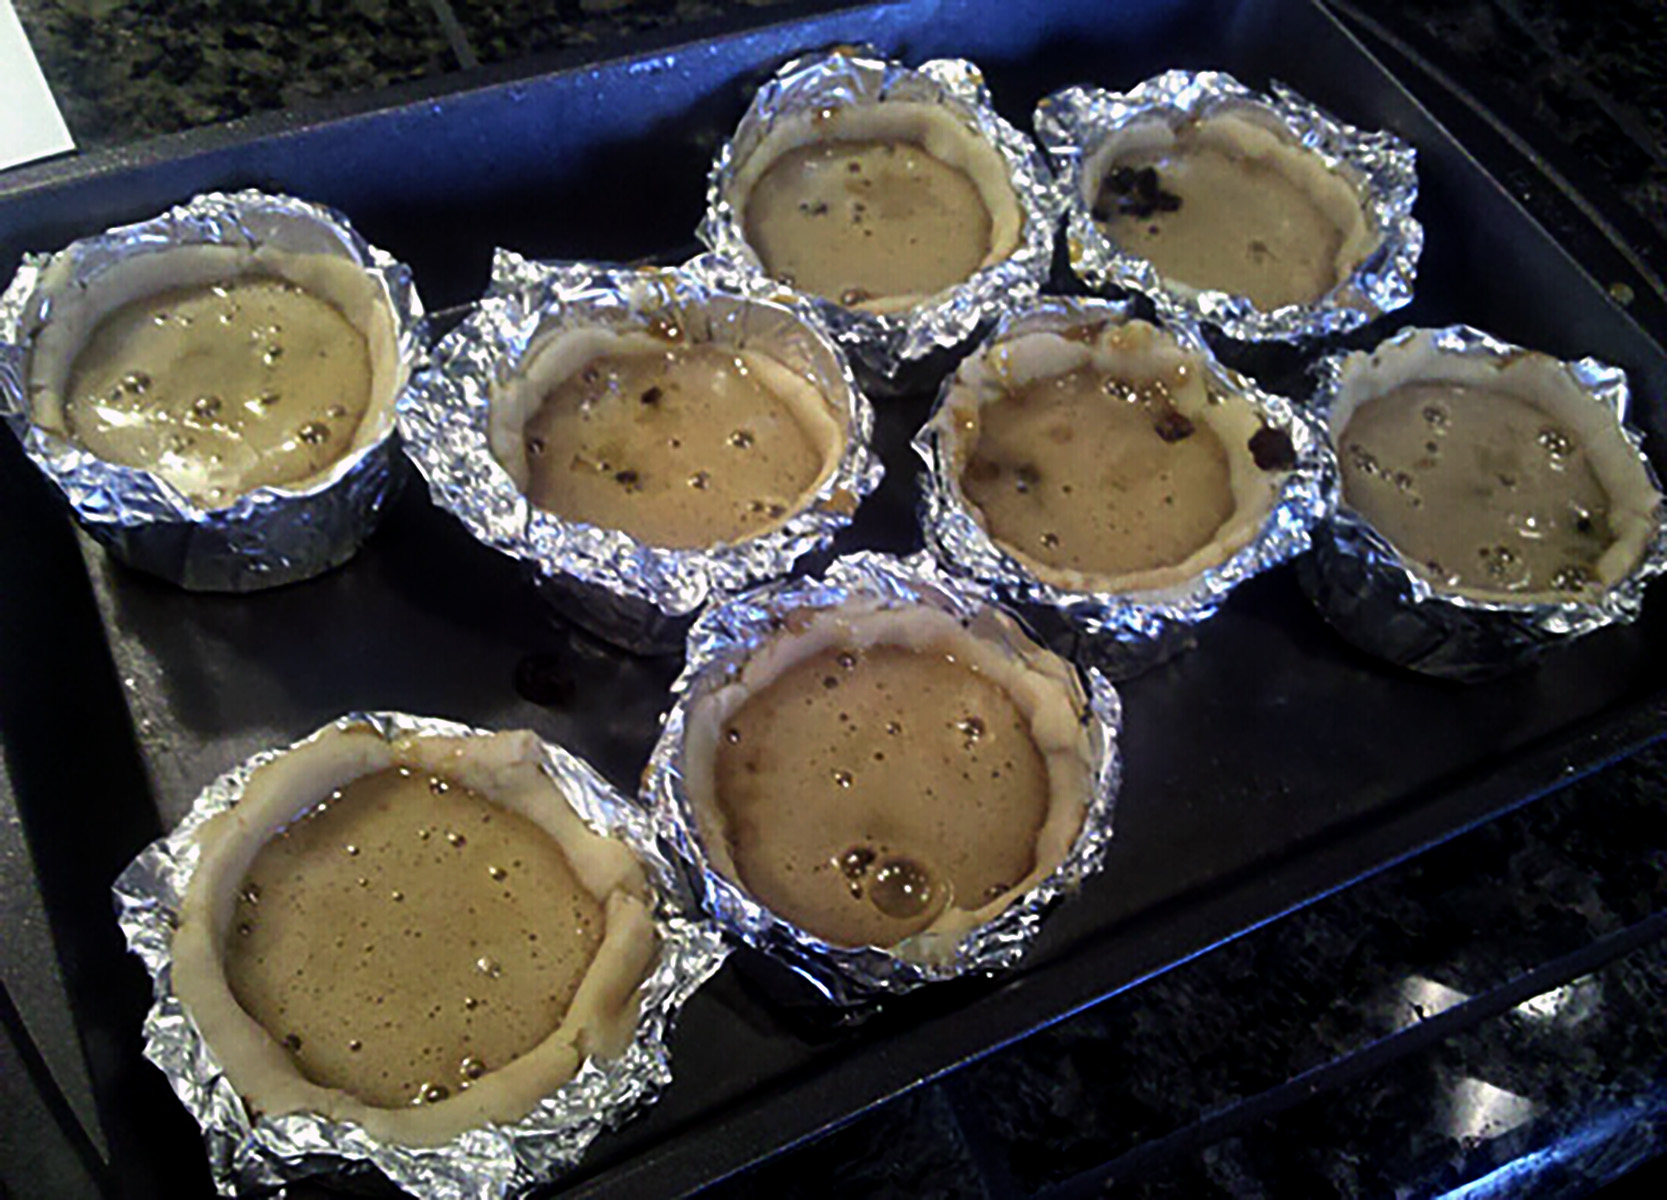 Homemade foil cuts, arranged in baking pans.  The cups have been lined with dough and filled with raisings and filling.